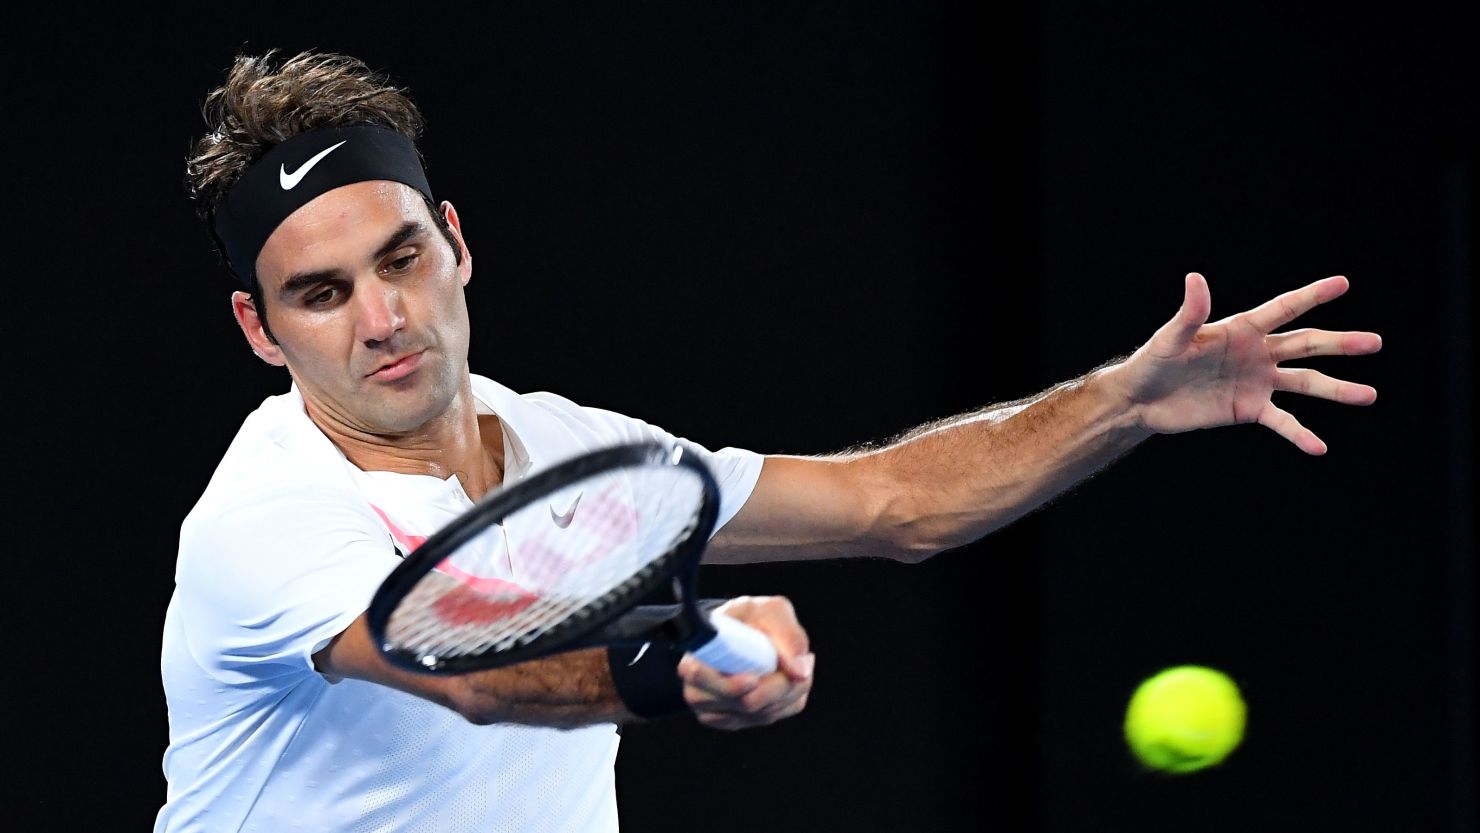 MELBOURNE, AUSTRALIA - JANUARY 26:  Roger Federer of Switzerland plays a forehand in his semi-final match against Hyeon Chung of South Korea on day 12 of the 2018 Australian Open at Melbourne Park on January 26, 2018 in Melbourne, Australia.  (Photo by Quinn Rooney/Getty Images)